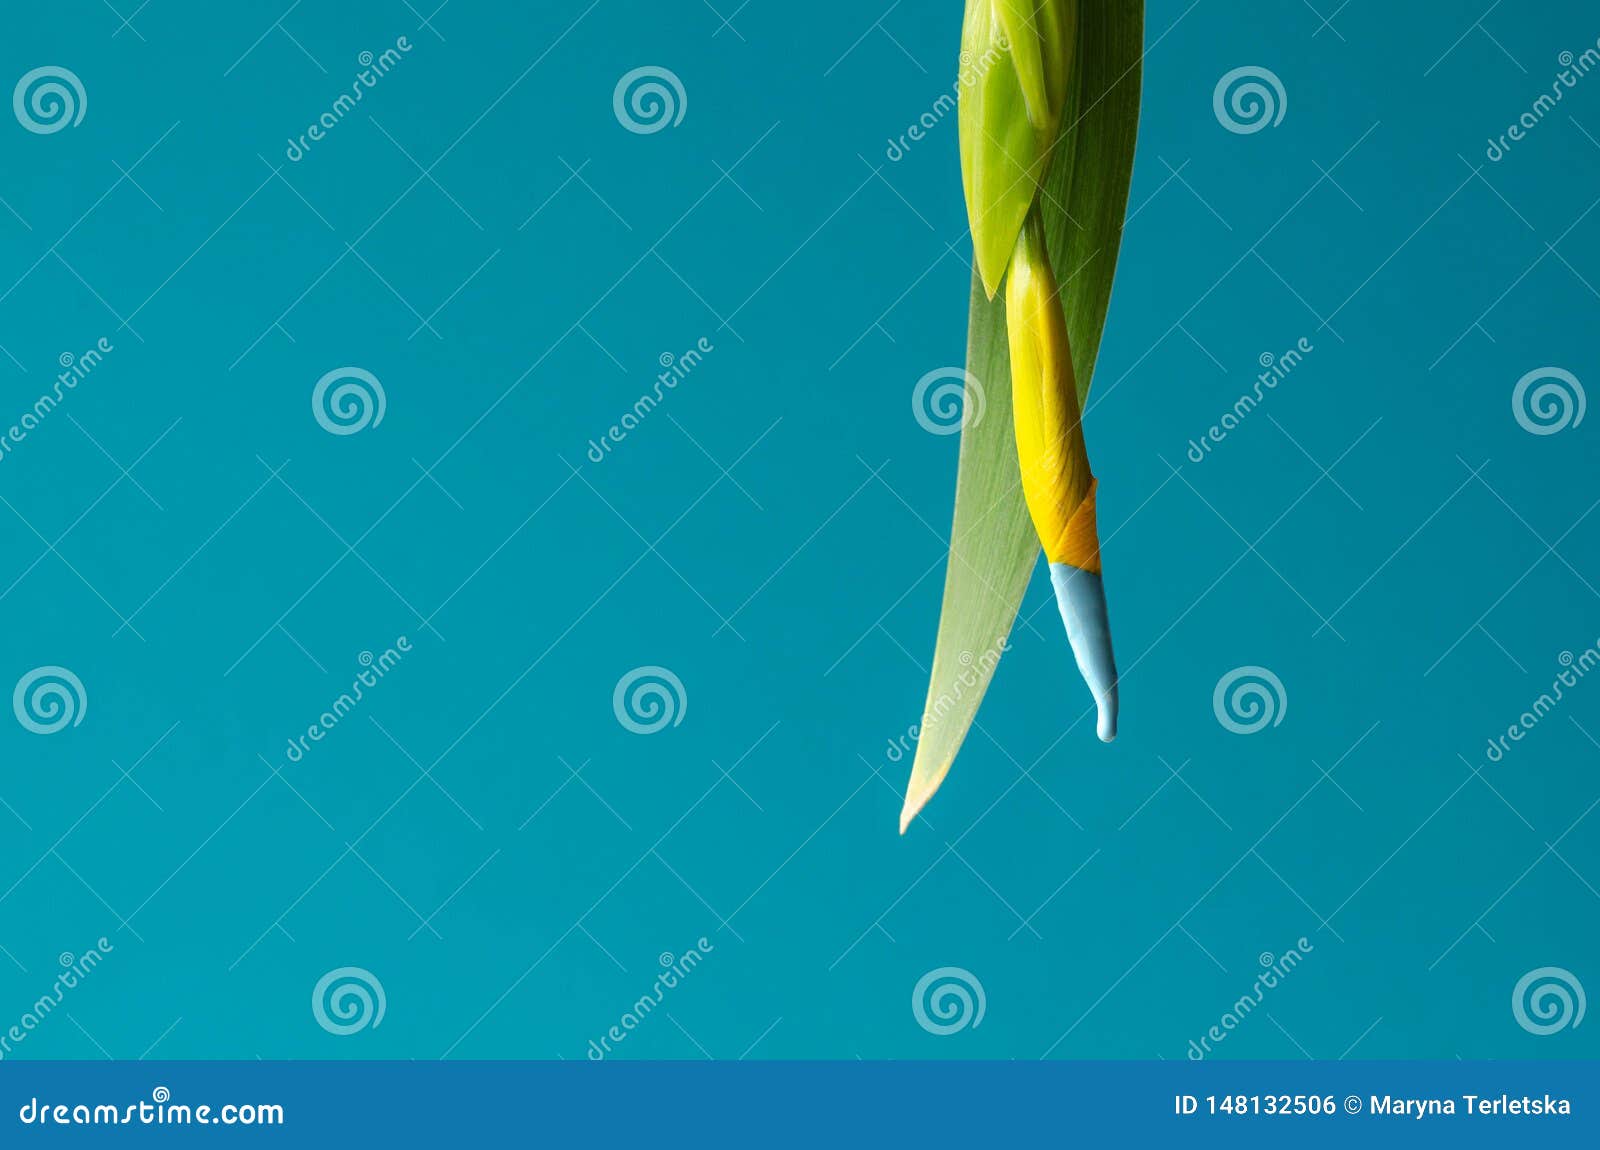 Closed Flower of Yellow Iris on a Turquoise Background Stock Photo ...